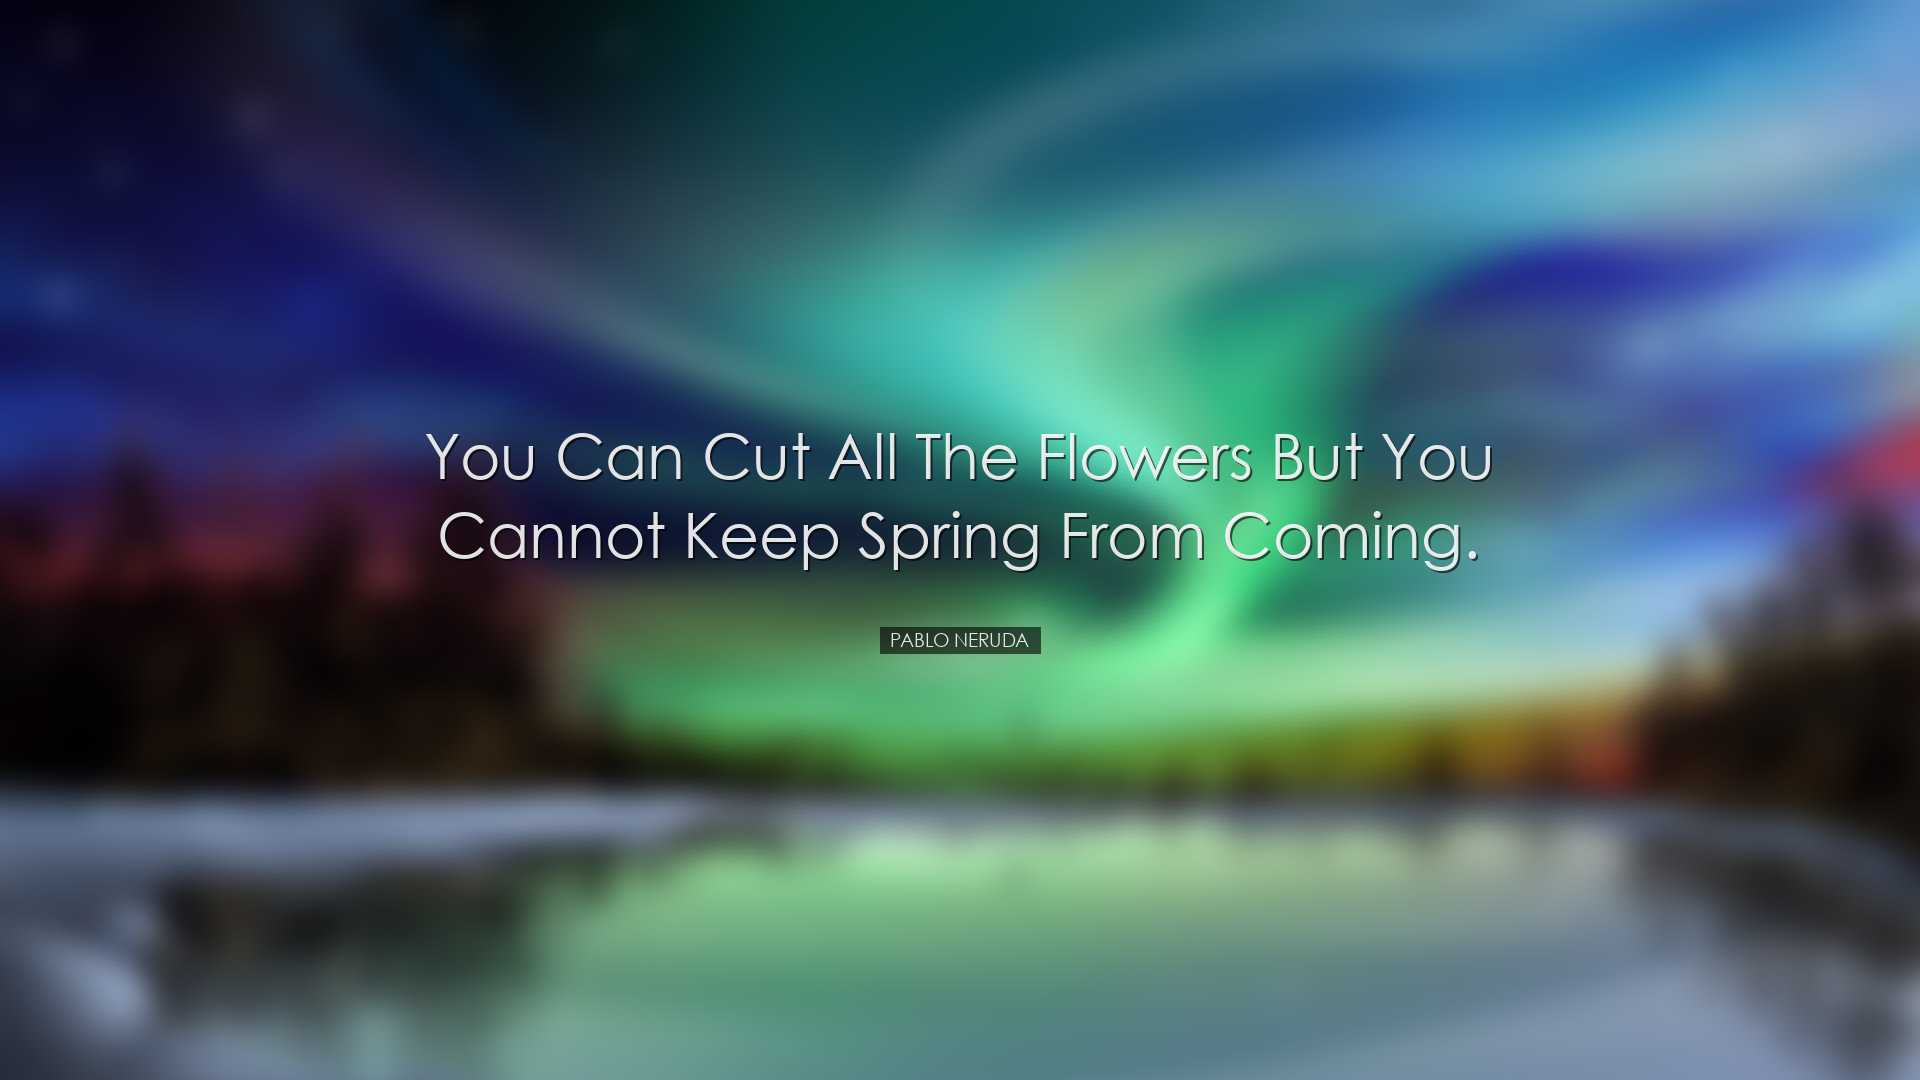 You can cut all the flowers but you cannot keep spring from coming